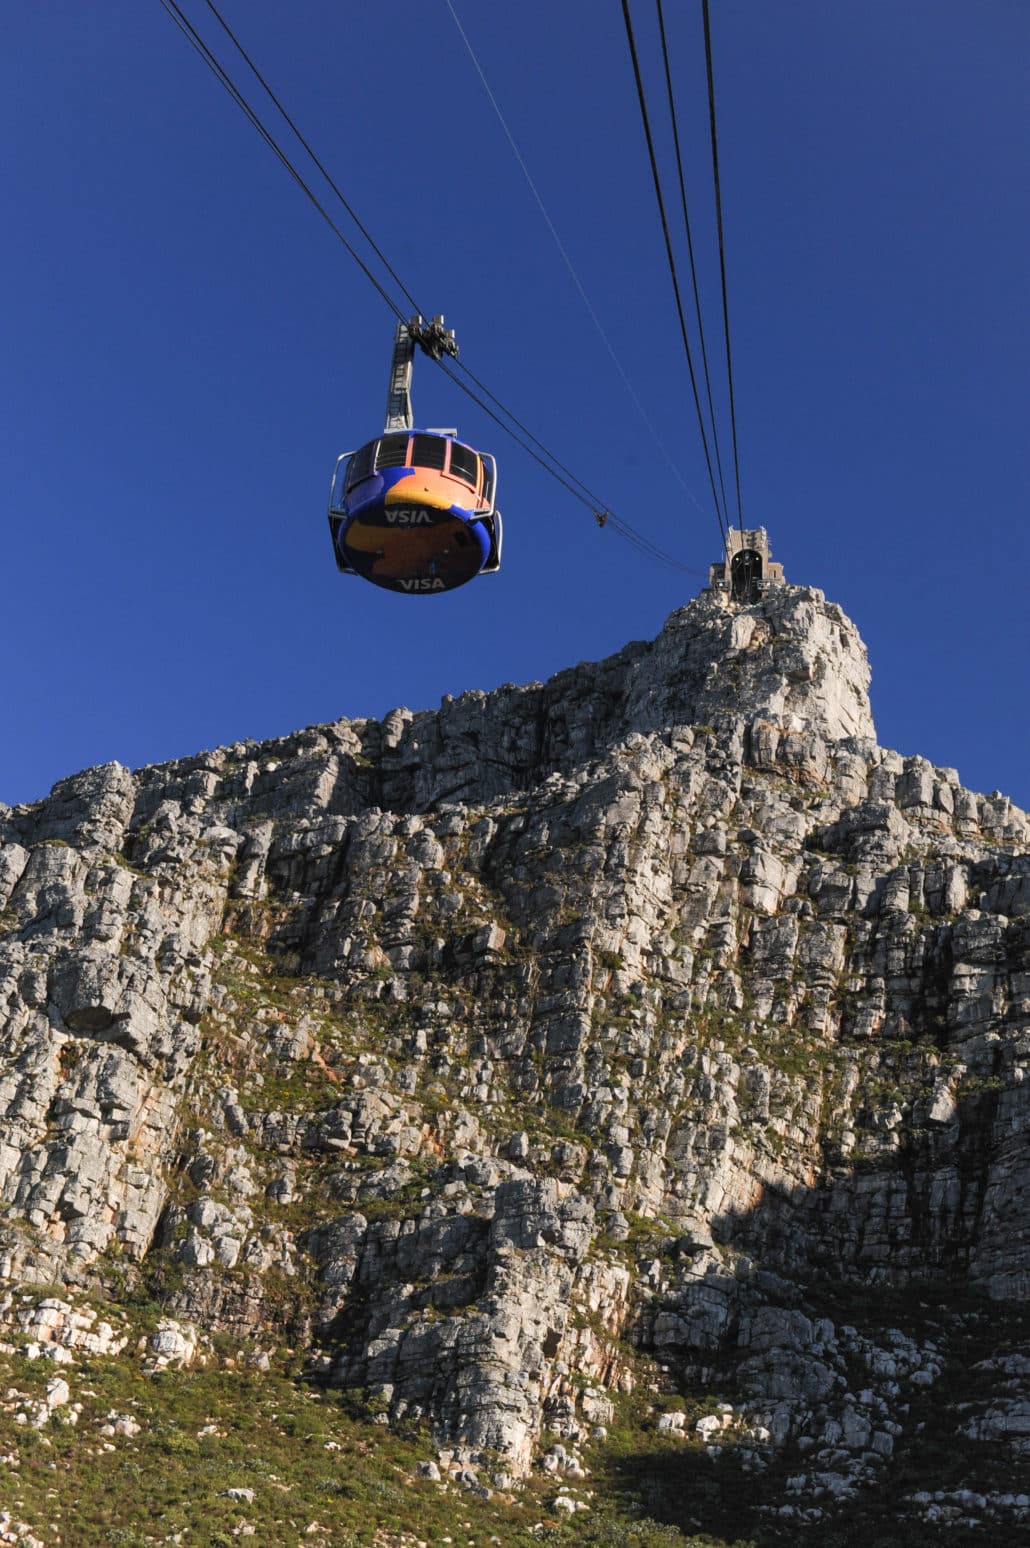 One can reach the top of Table Mountain at 3,500 feet in less than five minutes in the new rotating cable cars